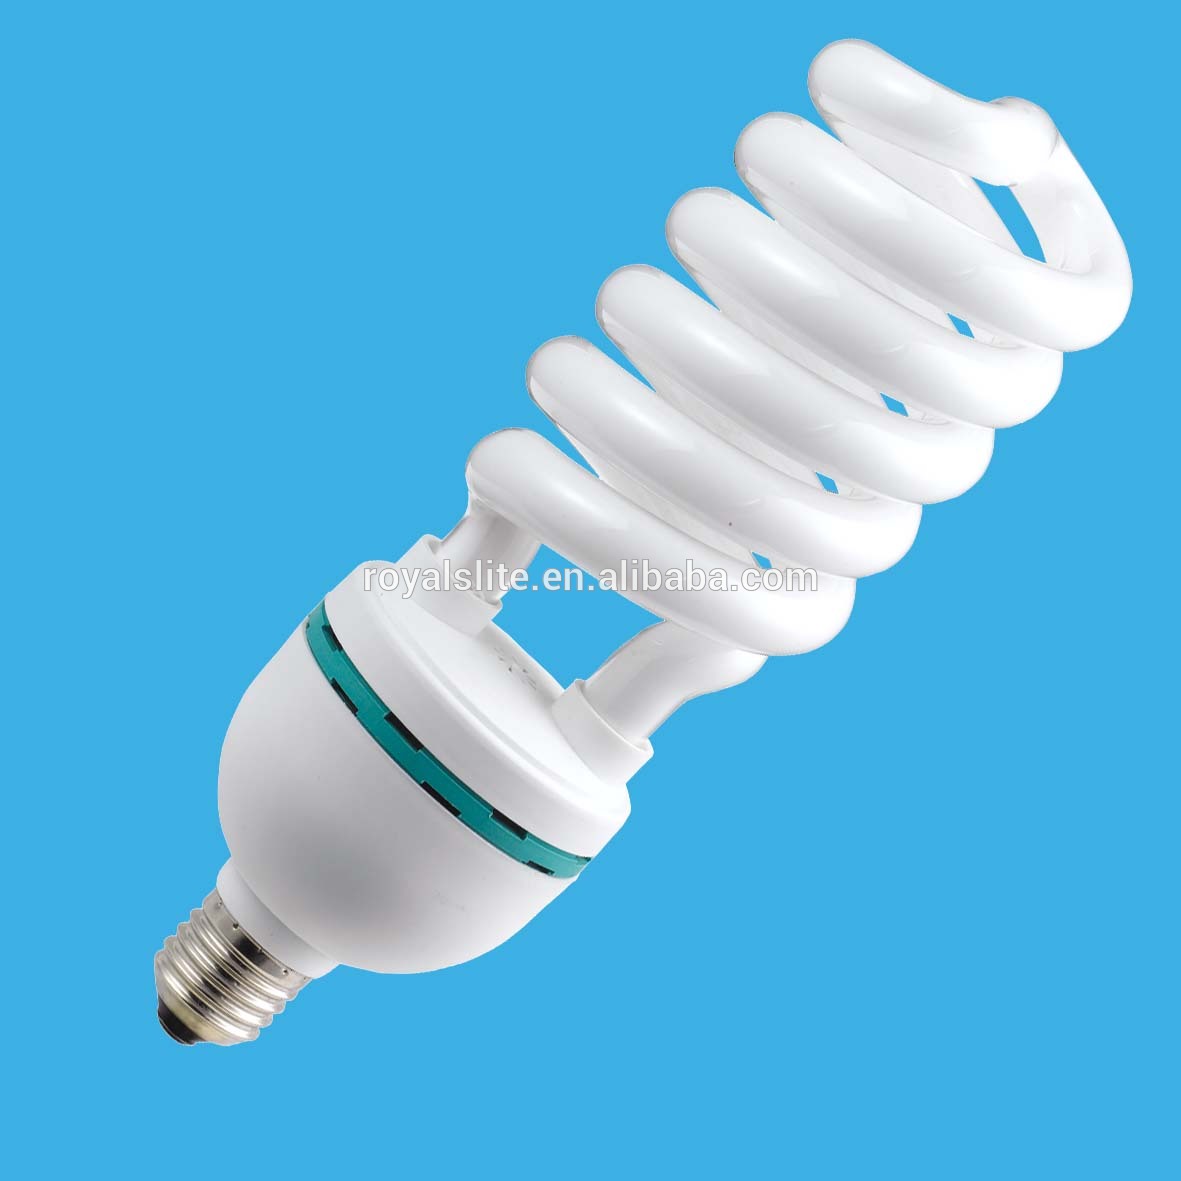 products you can import from china best selling products fluorescent lamp